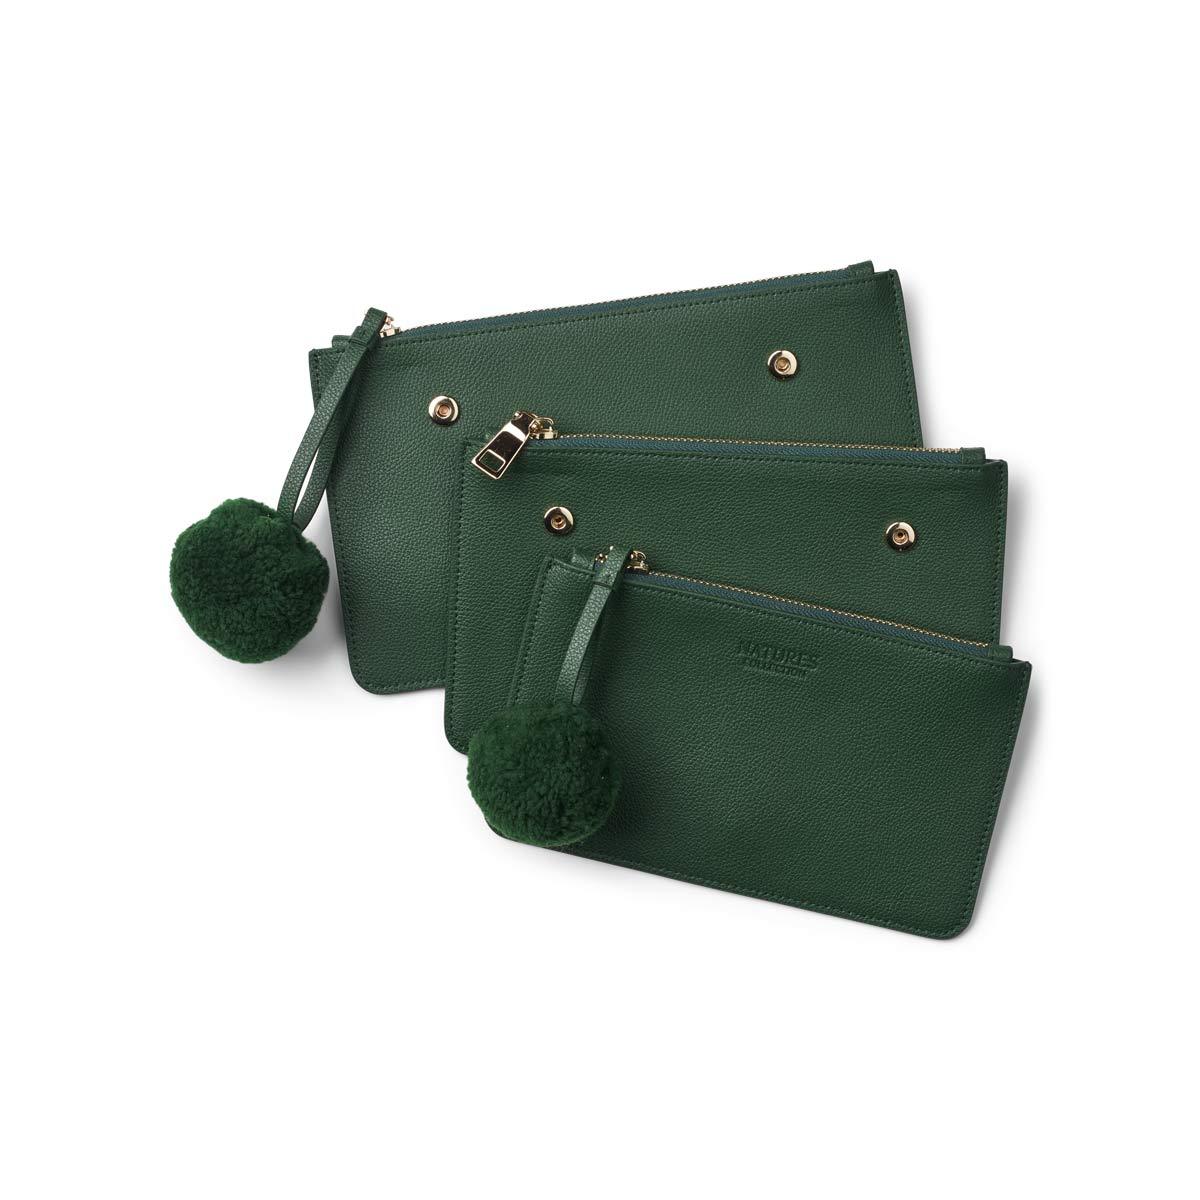 Camilla 3 in 1 Clutch of Leather - Naturescollection.eu